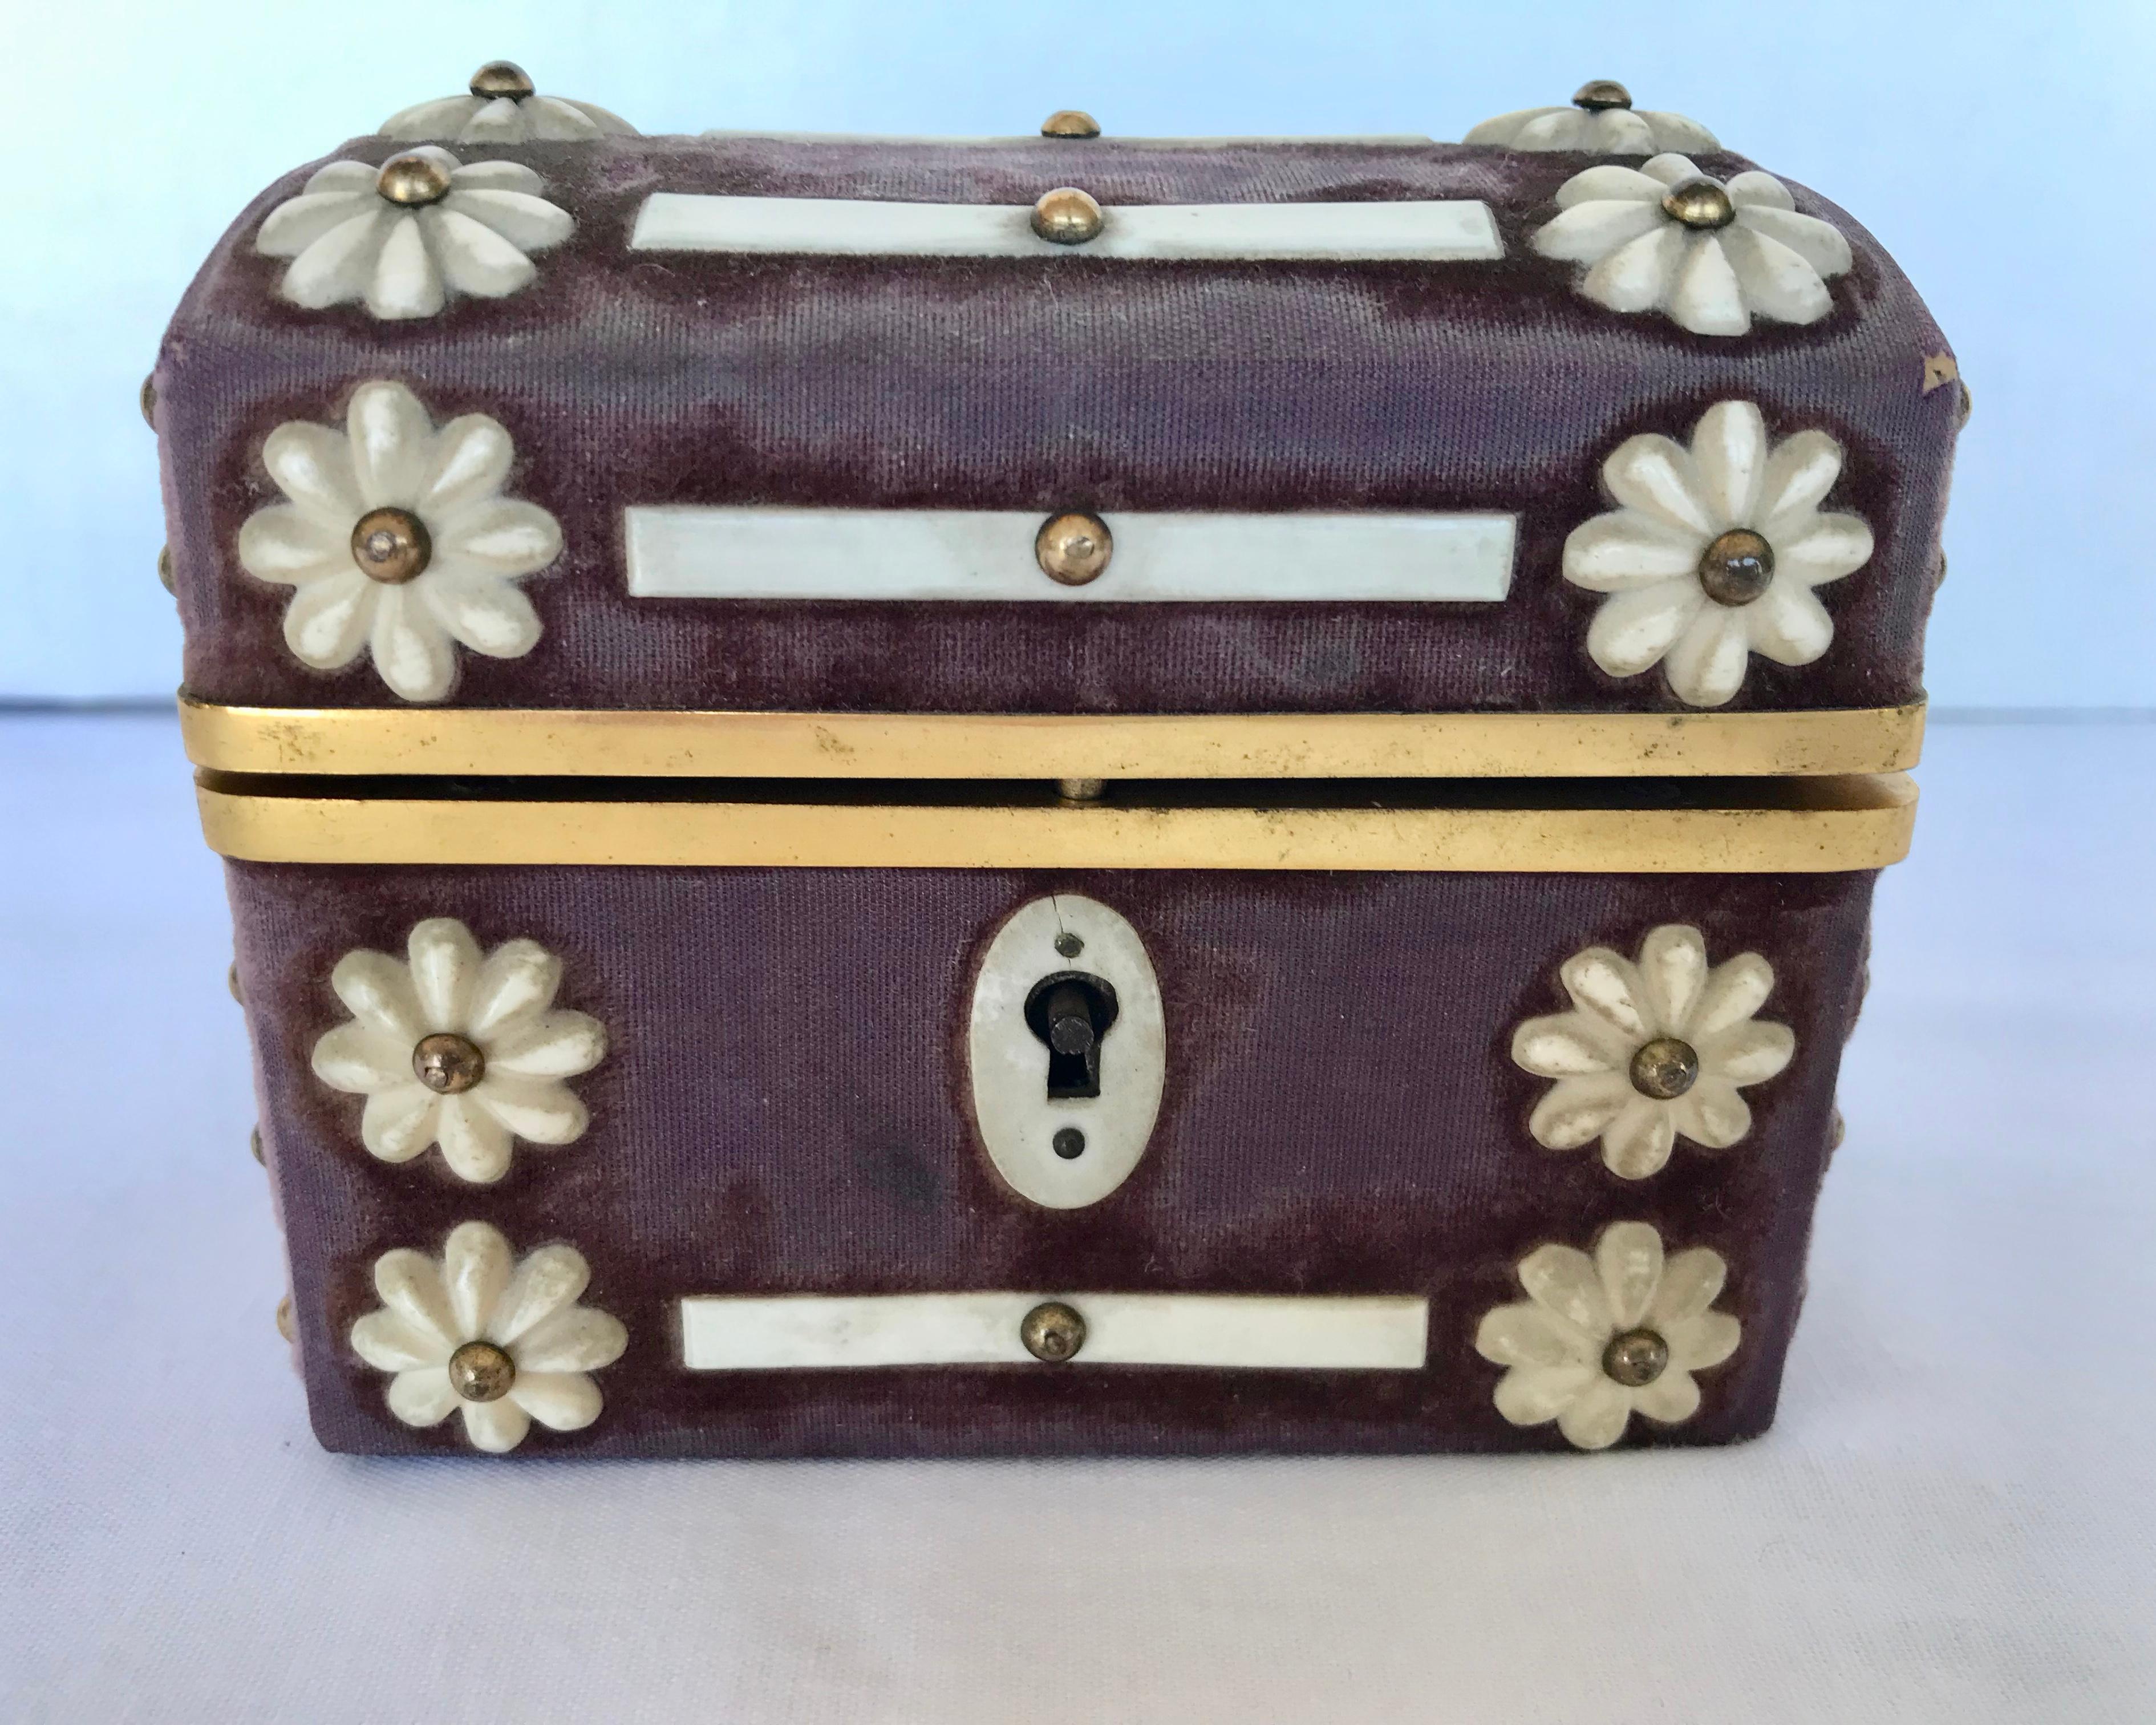 Gilt 19th Century English Dore' Mounted Travel Casket with 2 Scent Bottles